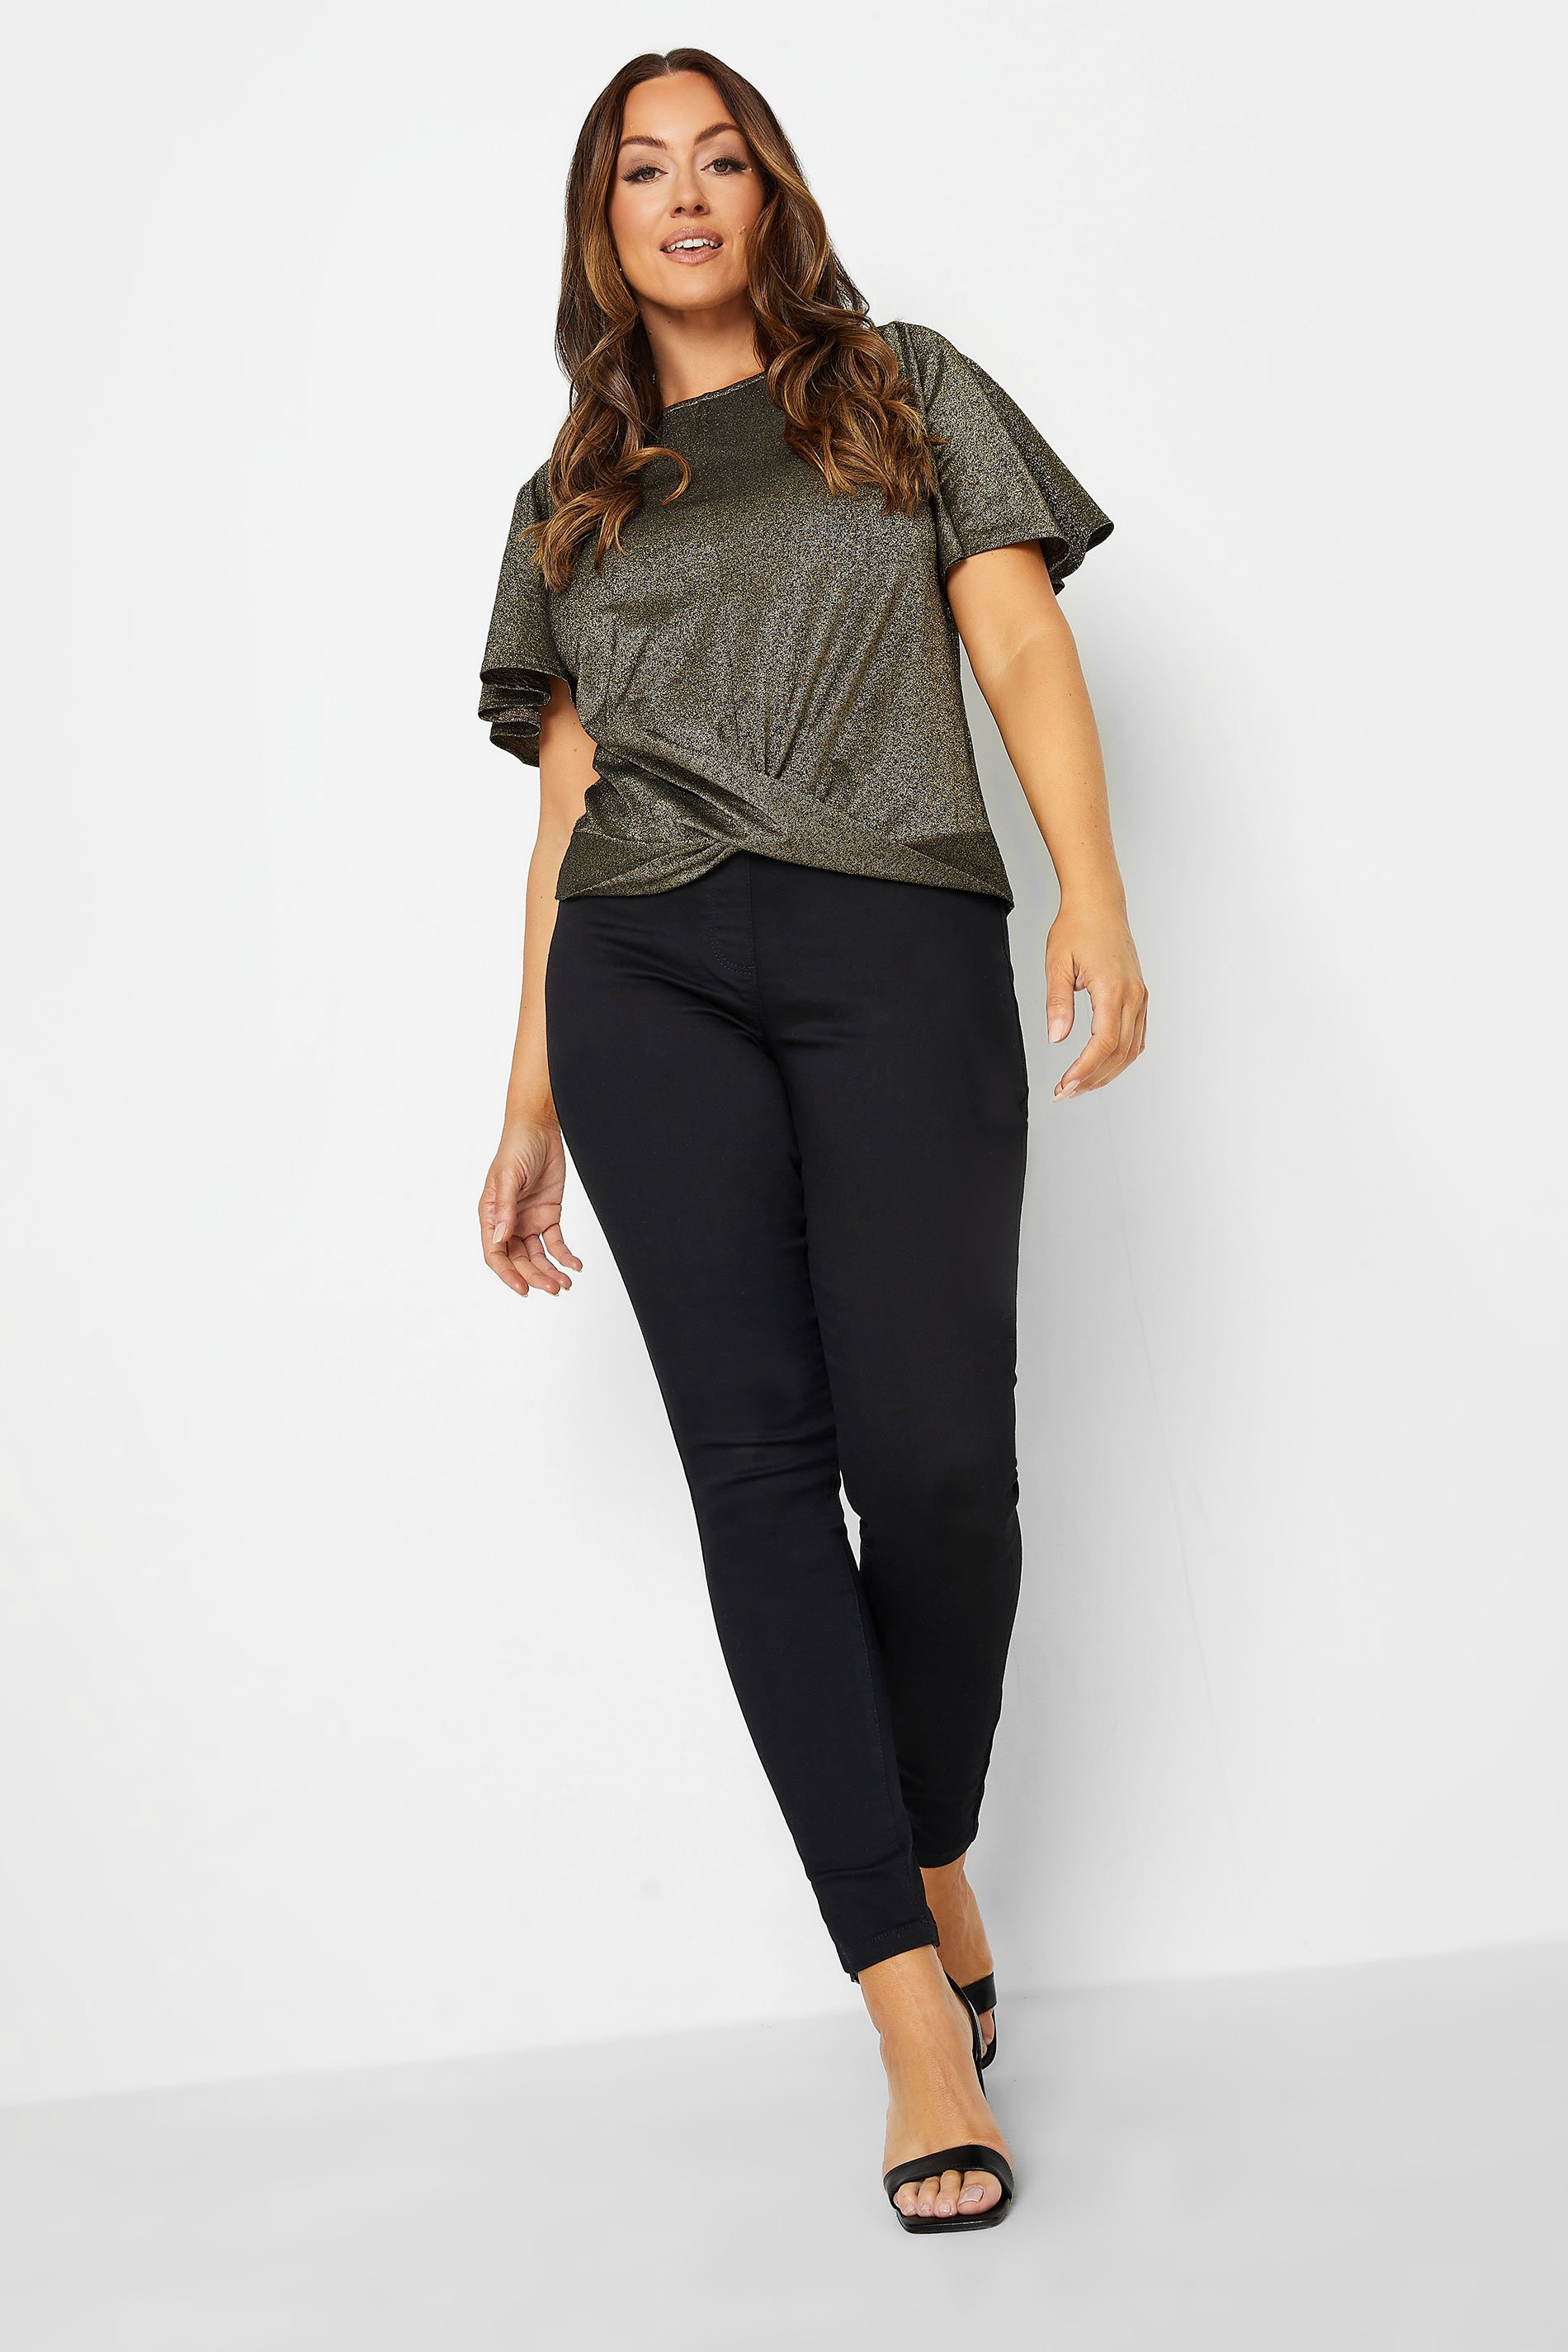 M&Co Gold Angel Sleeve Wrap Top | M&Co 2